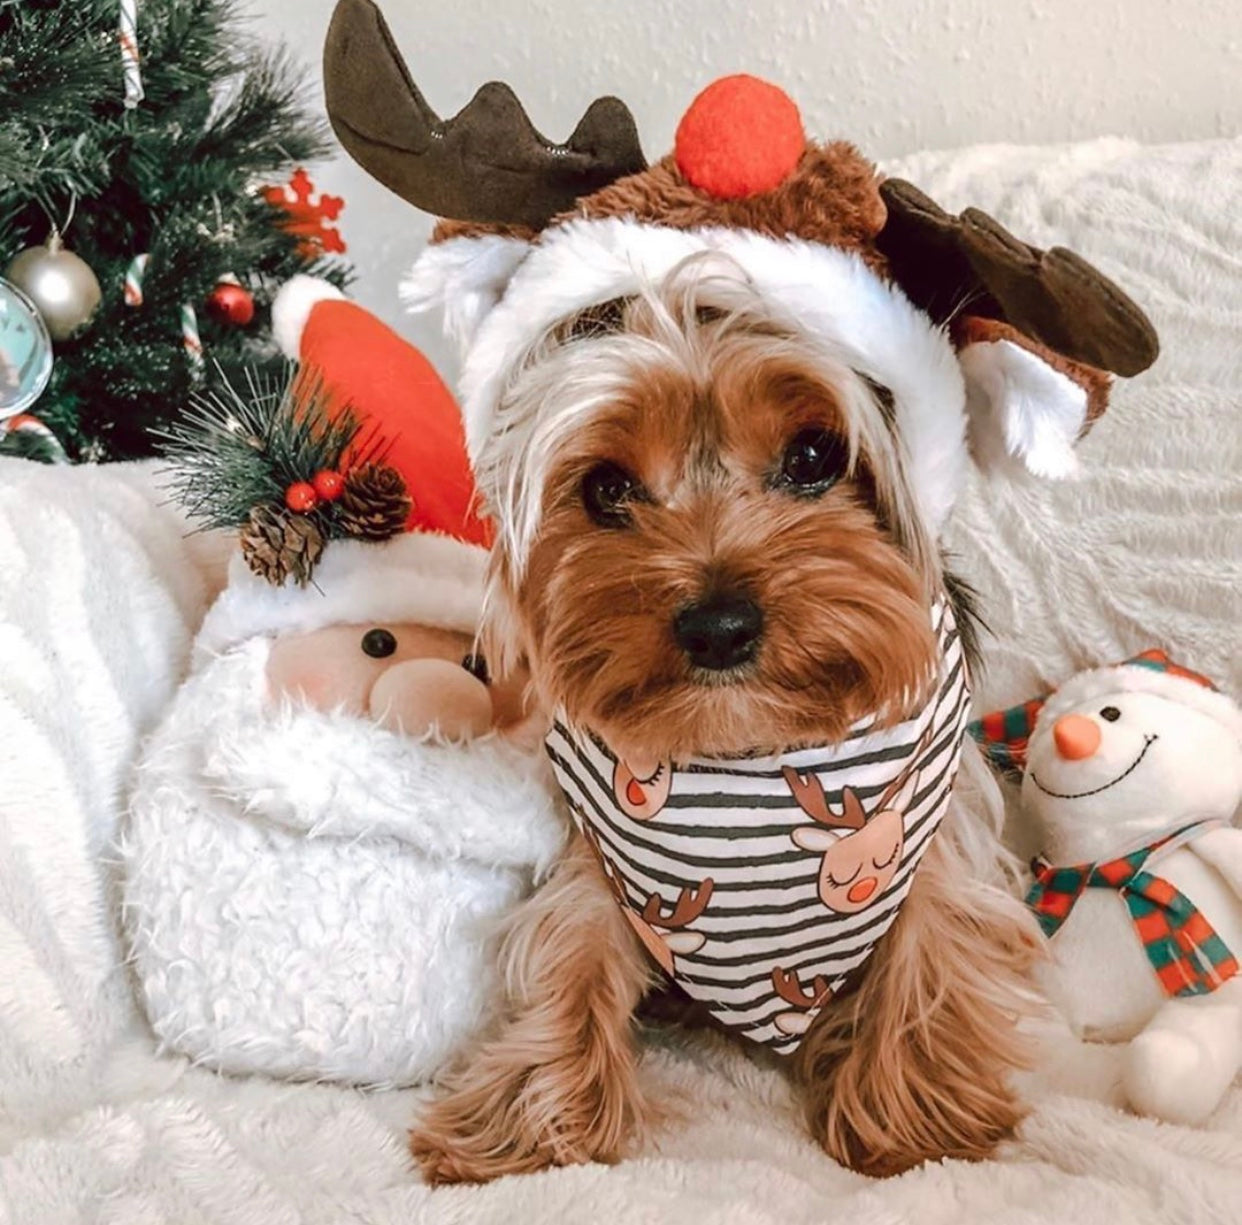 Dogs that are Holiday ready